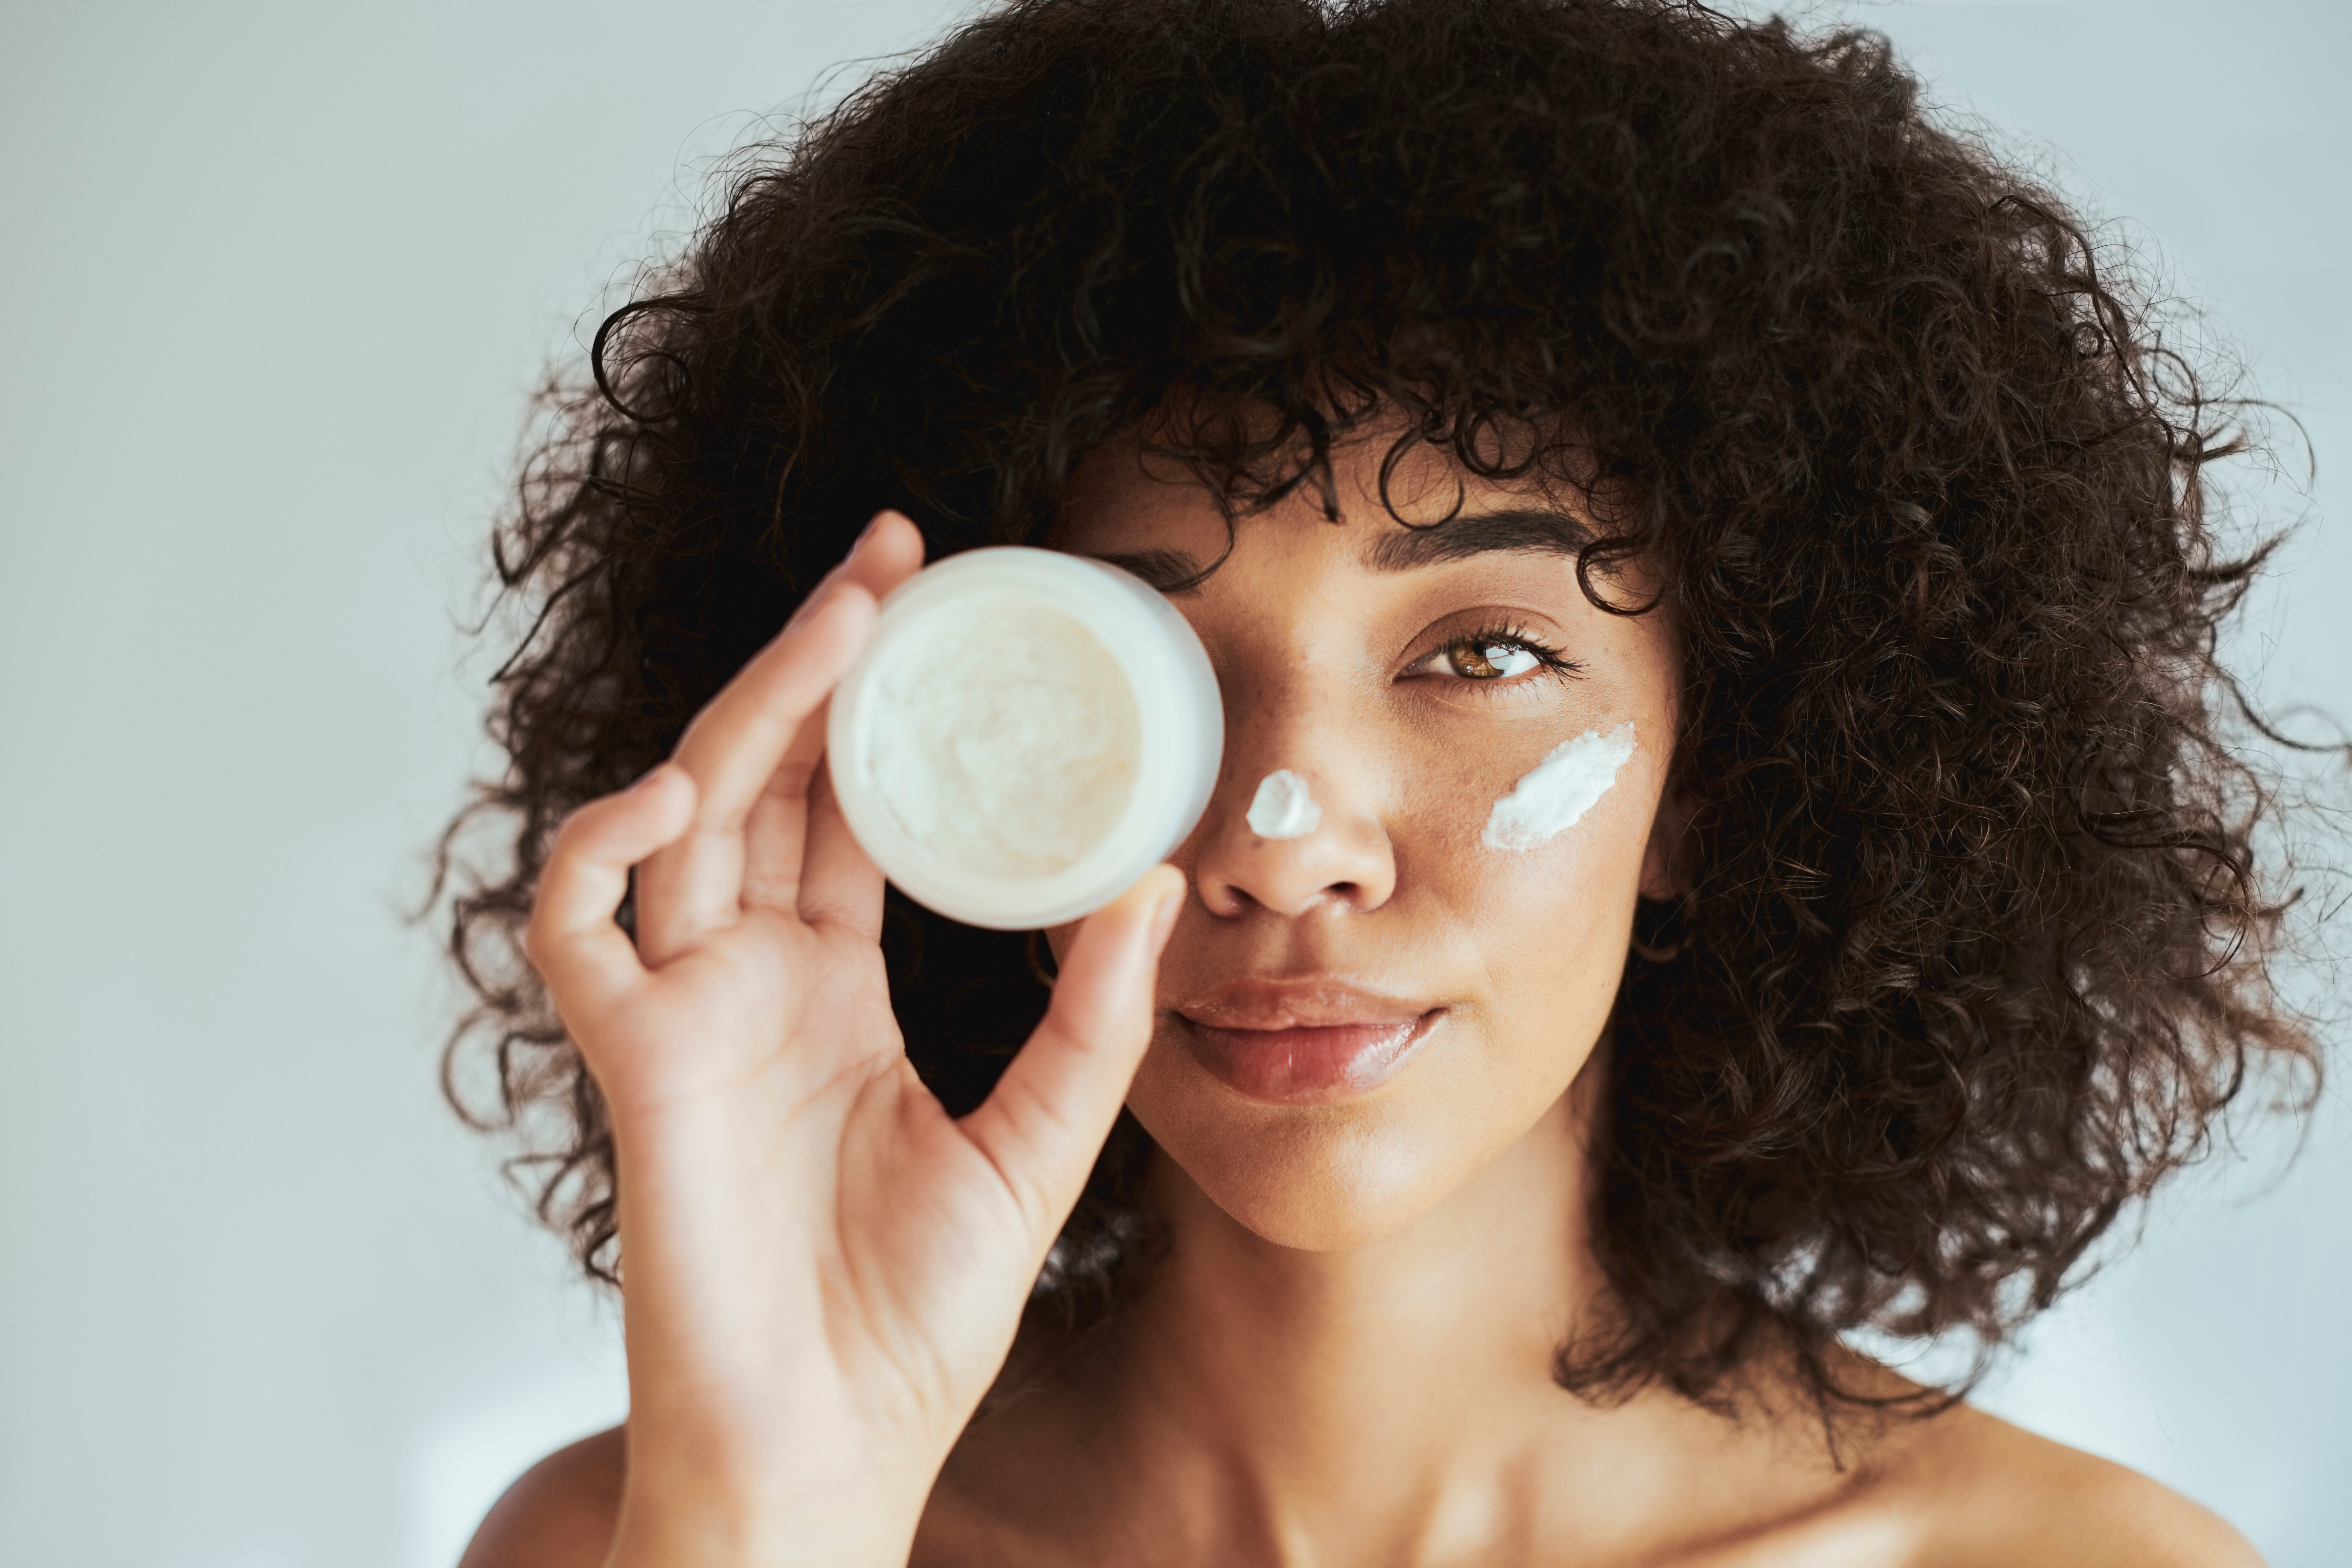 Expert Weighs in on the Beef Tallow Skin Care Trend on TikTok